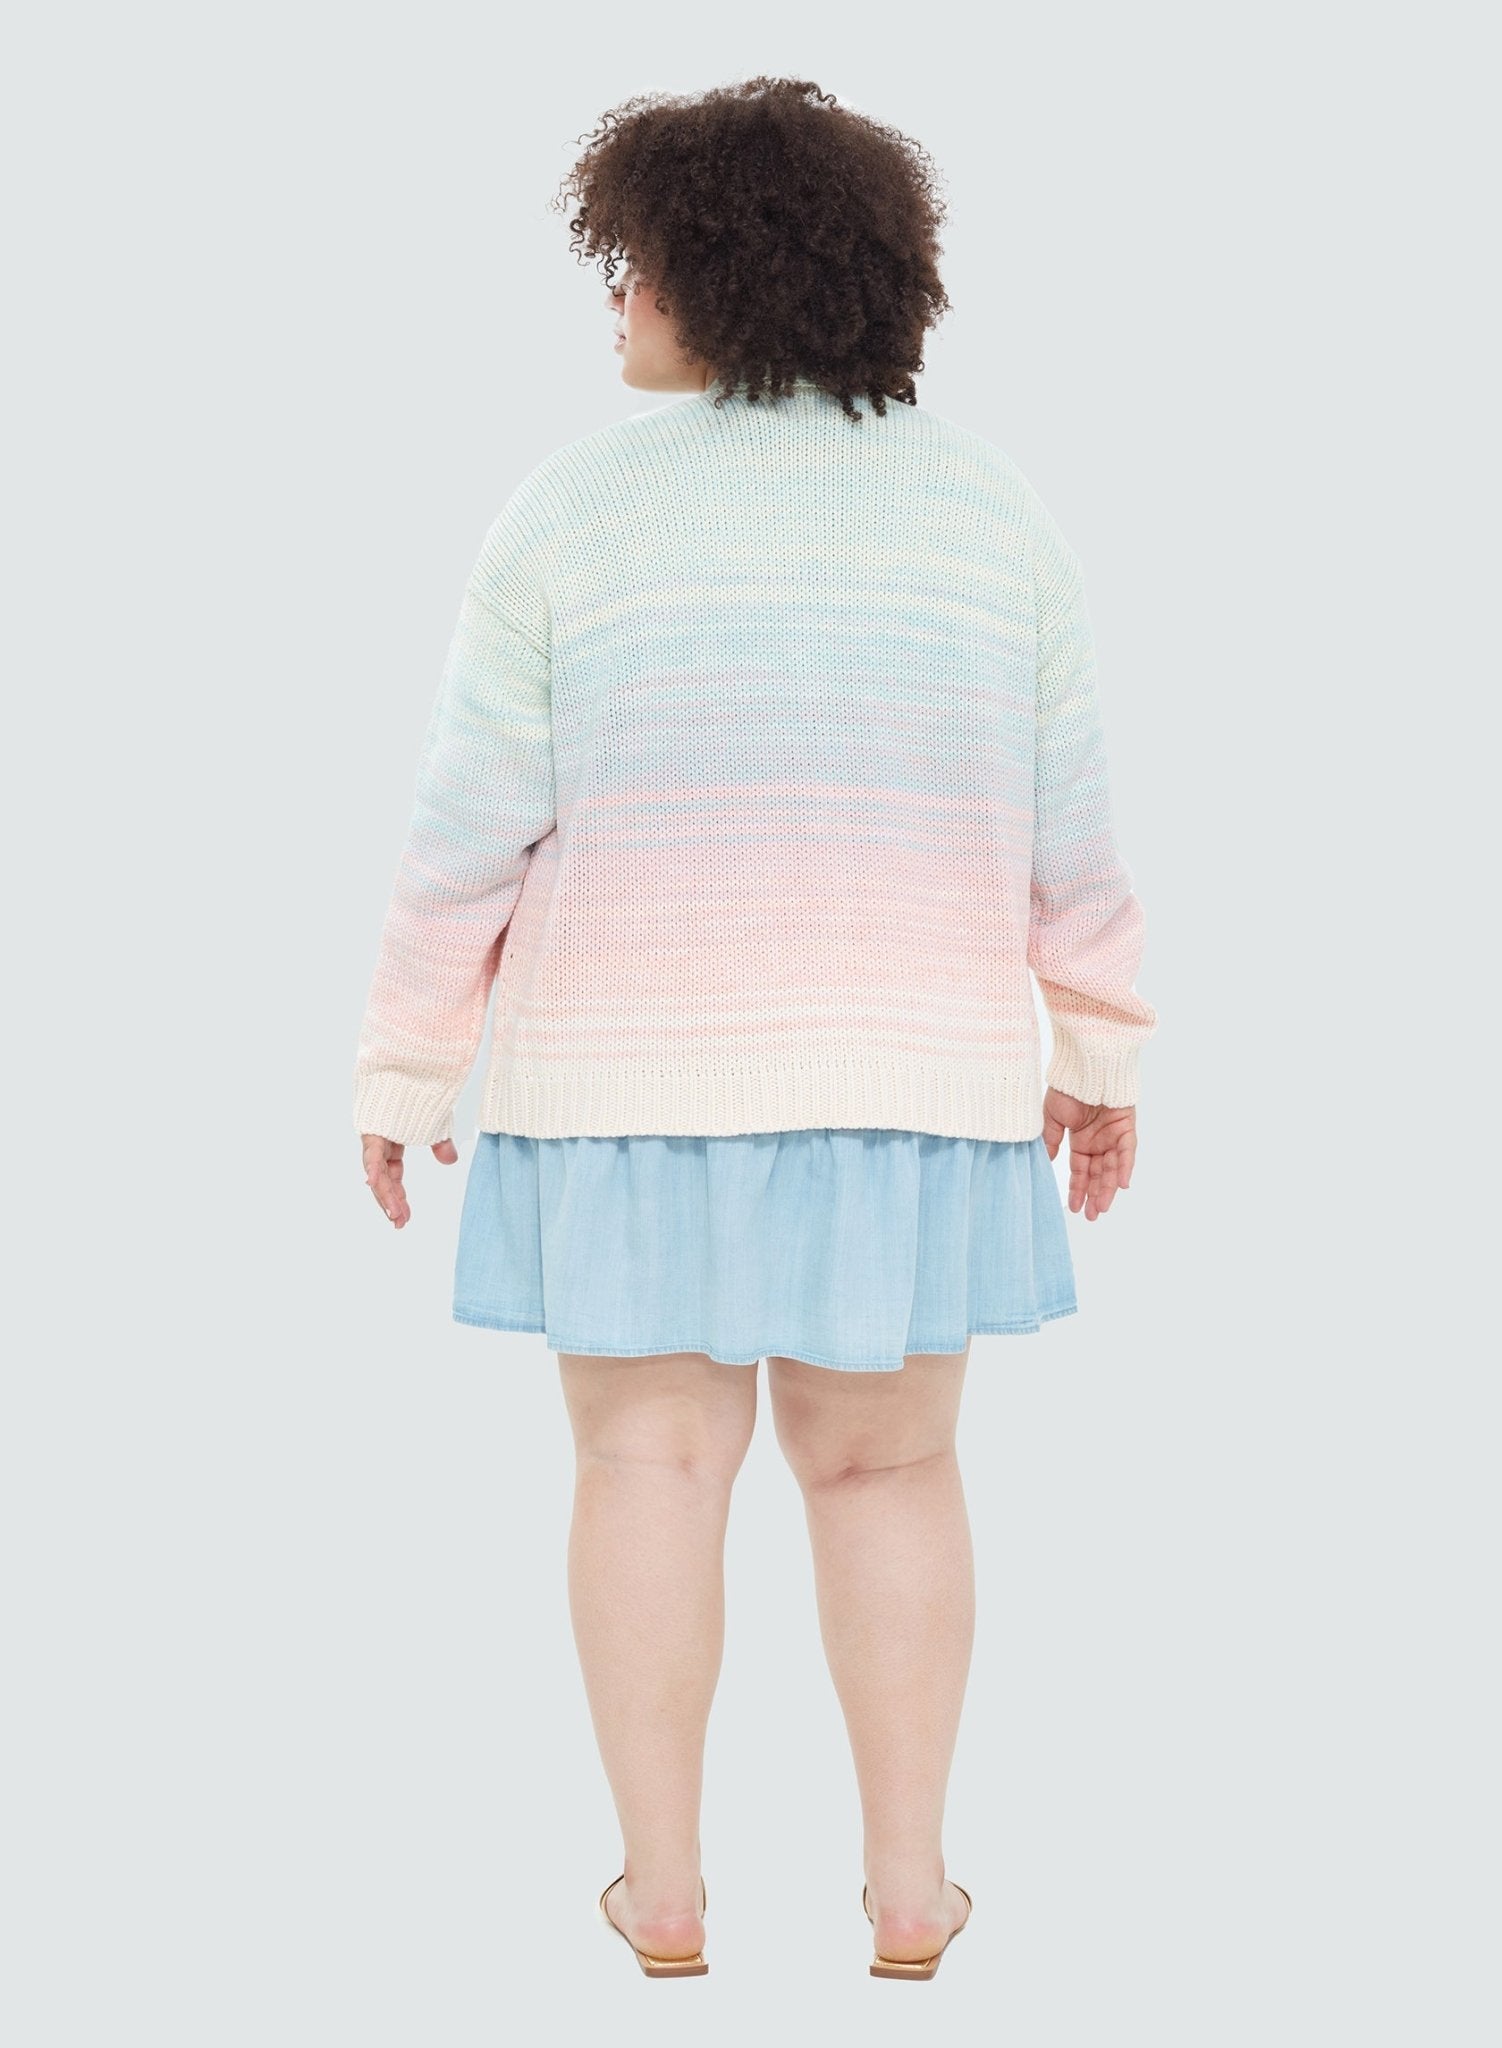 Ombre Cardigan (Pre order ships March 3rd) - Pinned Up Bra Lounge